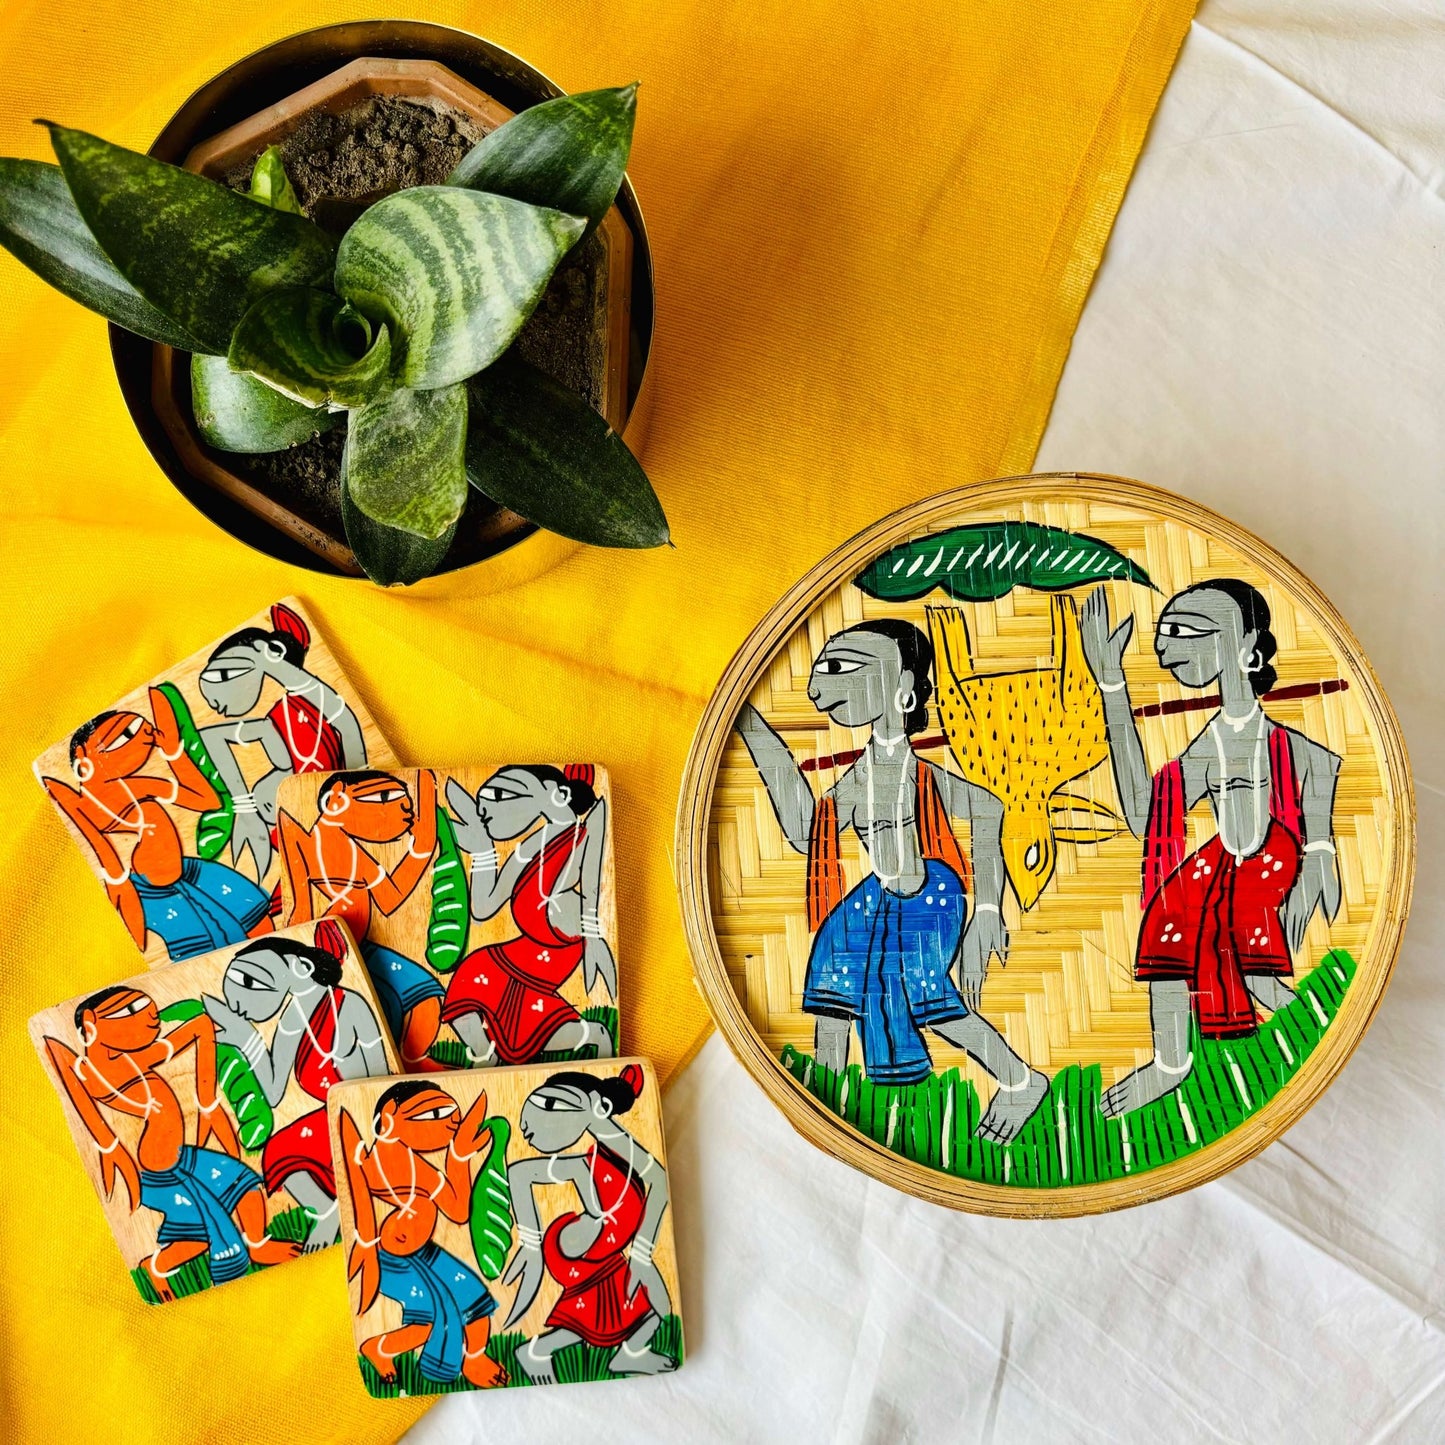 One hand-woven bamboo fruit box, and a set of four square wood coasters all hand-painted with a motif of tribal characters are displayed against a yellow background with a plant pot beside them